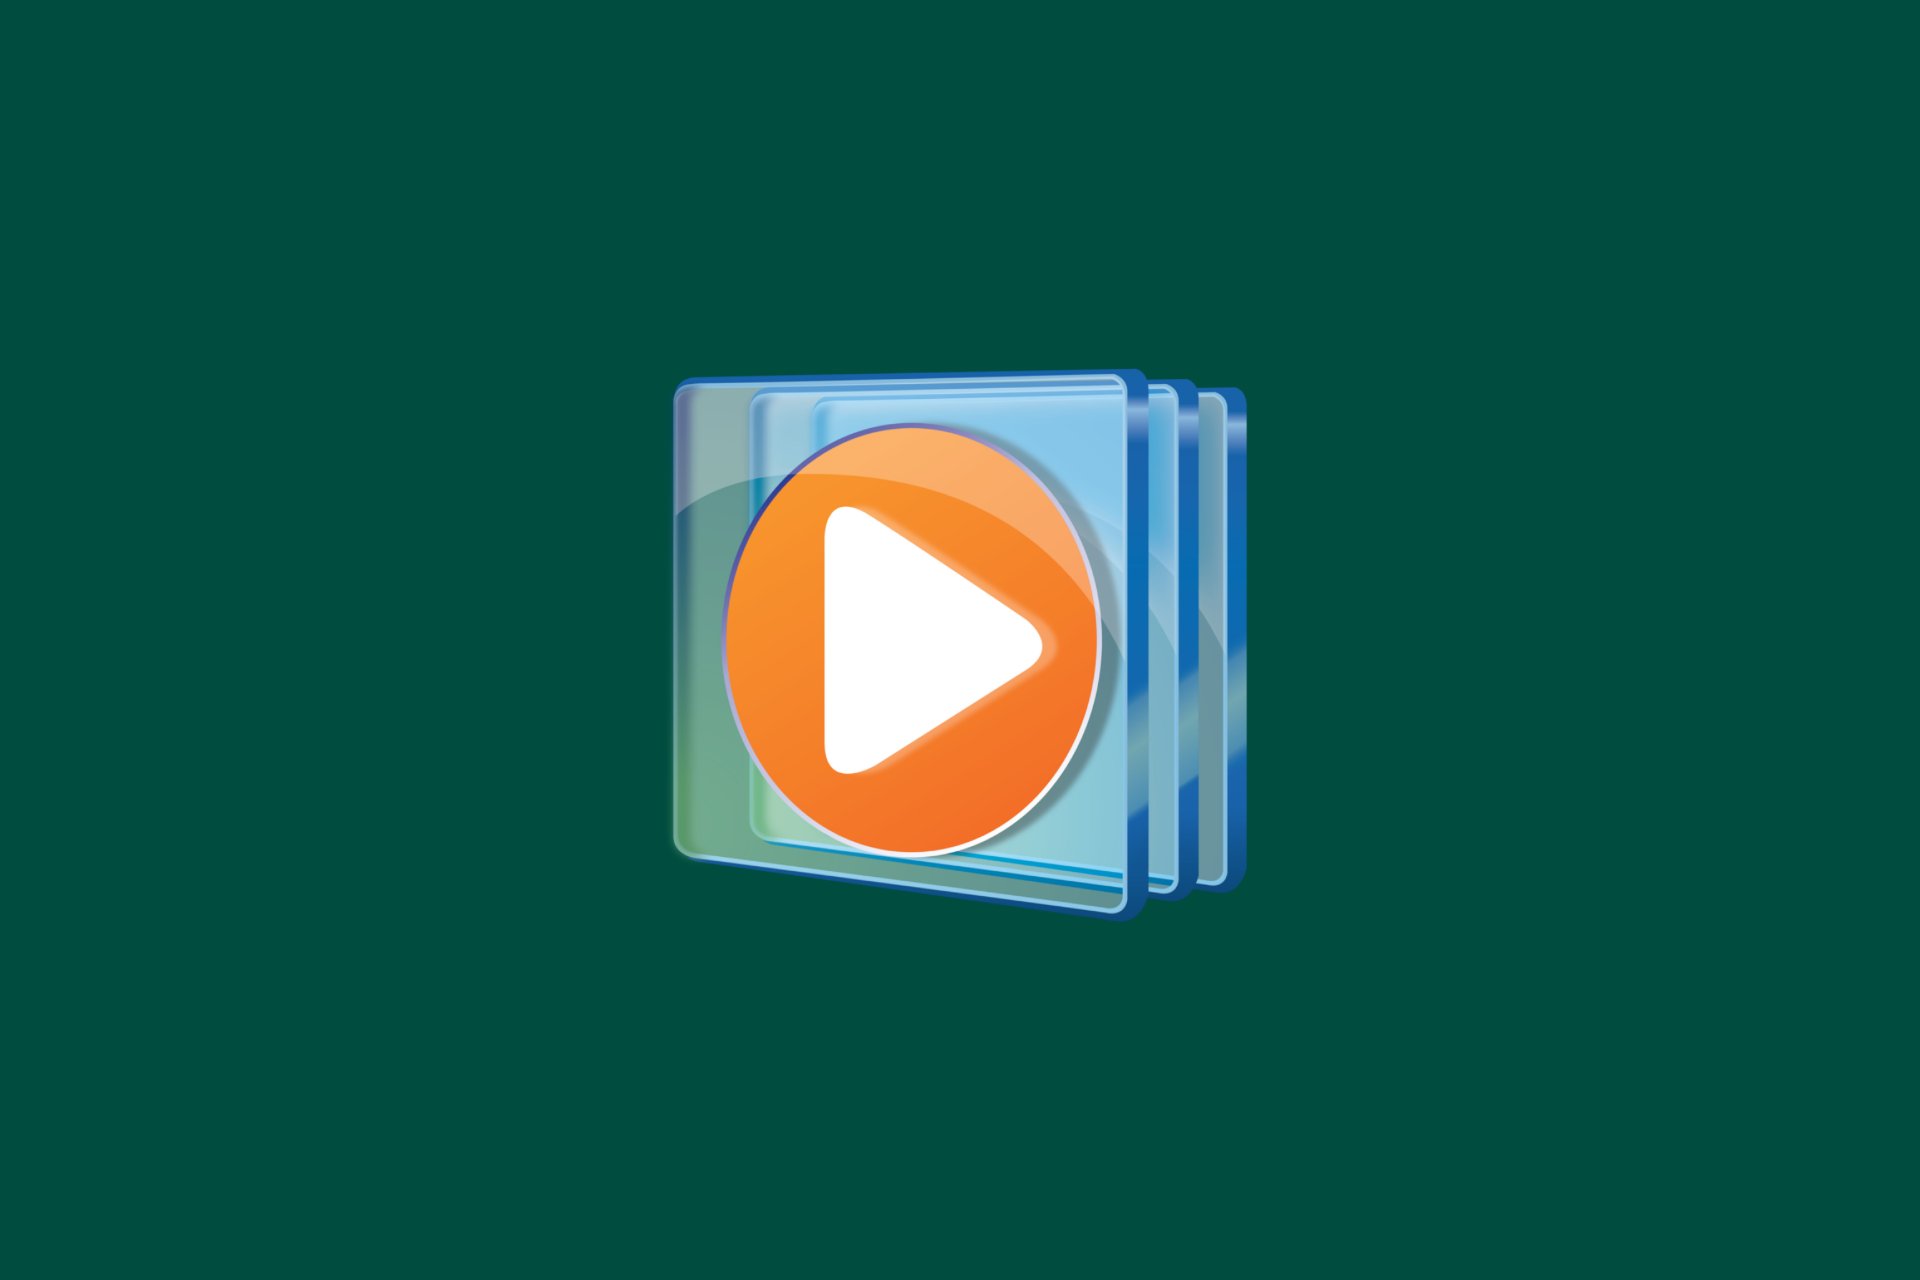 What files are by Windows Media Player?